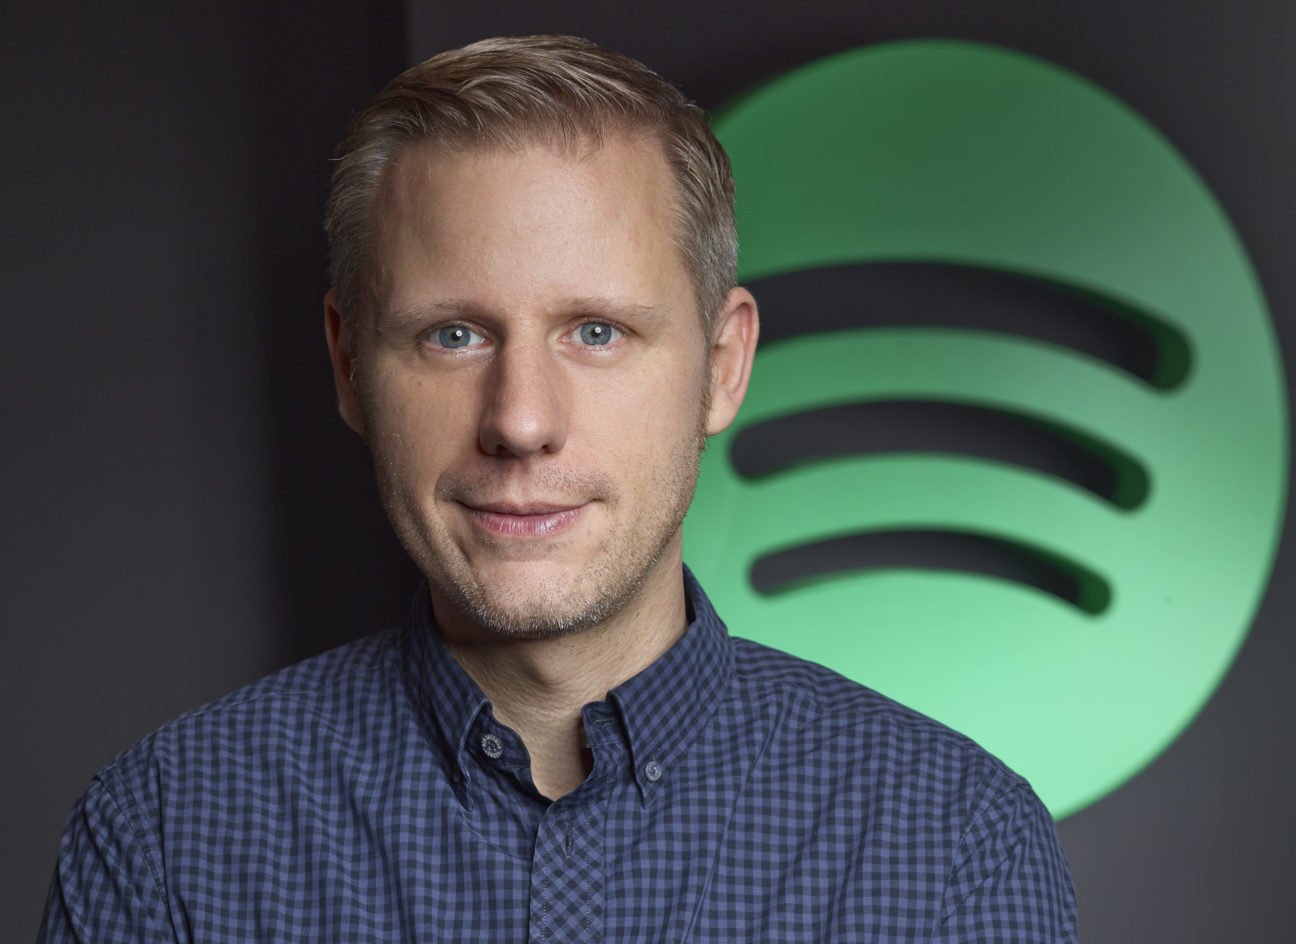 Spotify poaches Deezer’s CEO of EMEA, Michael Krause - Music Business